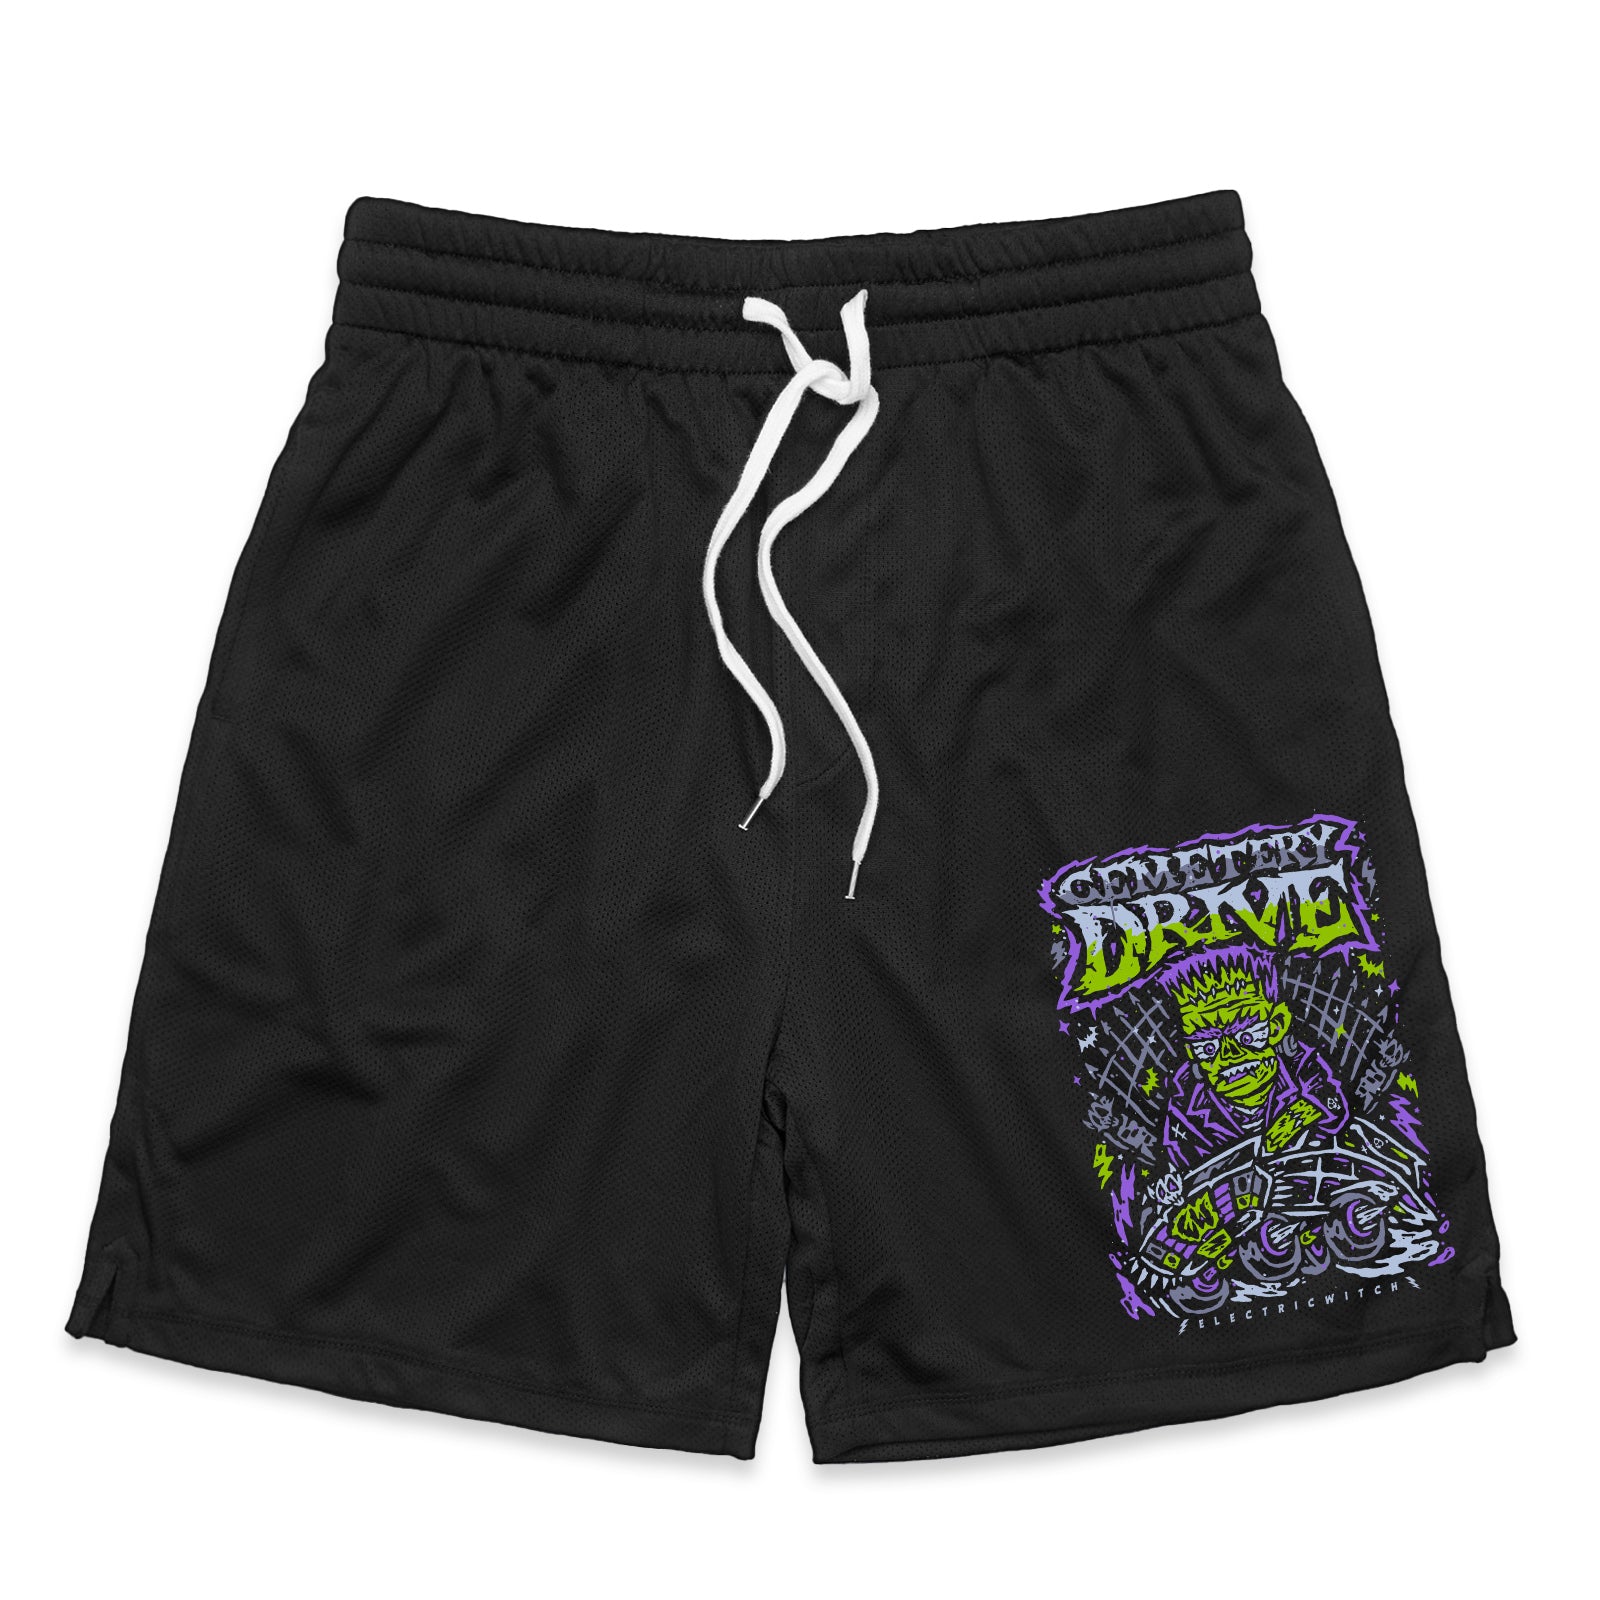 Cemetery Drive Gym Shorts